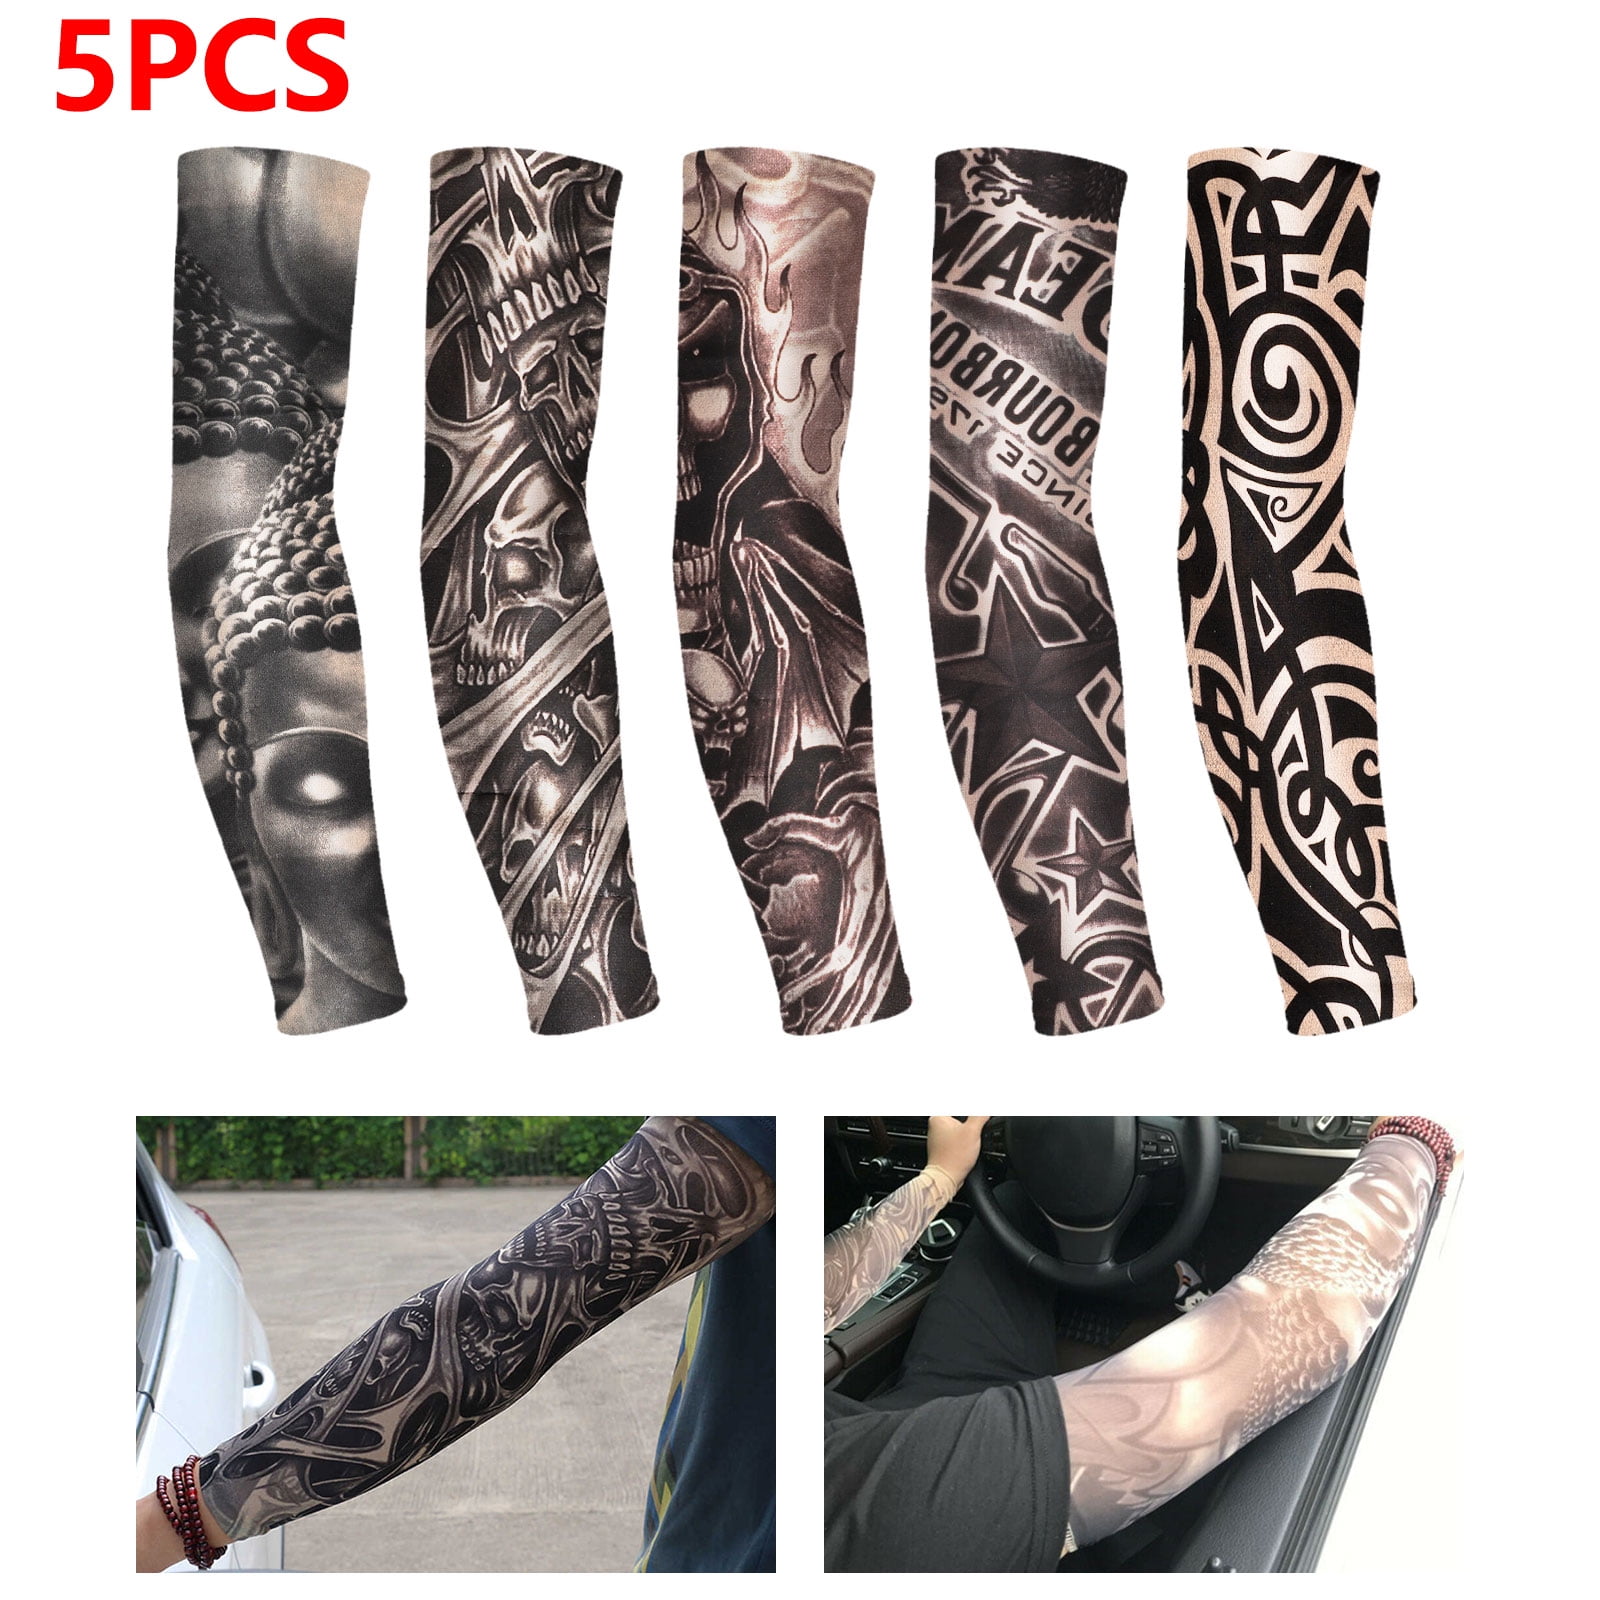 5PCS UV Sun Protection Cooling Arm Sleeves Compression Arm Cover Shield Sport 